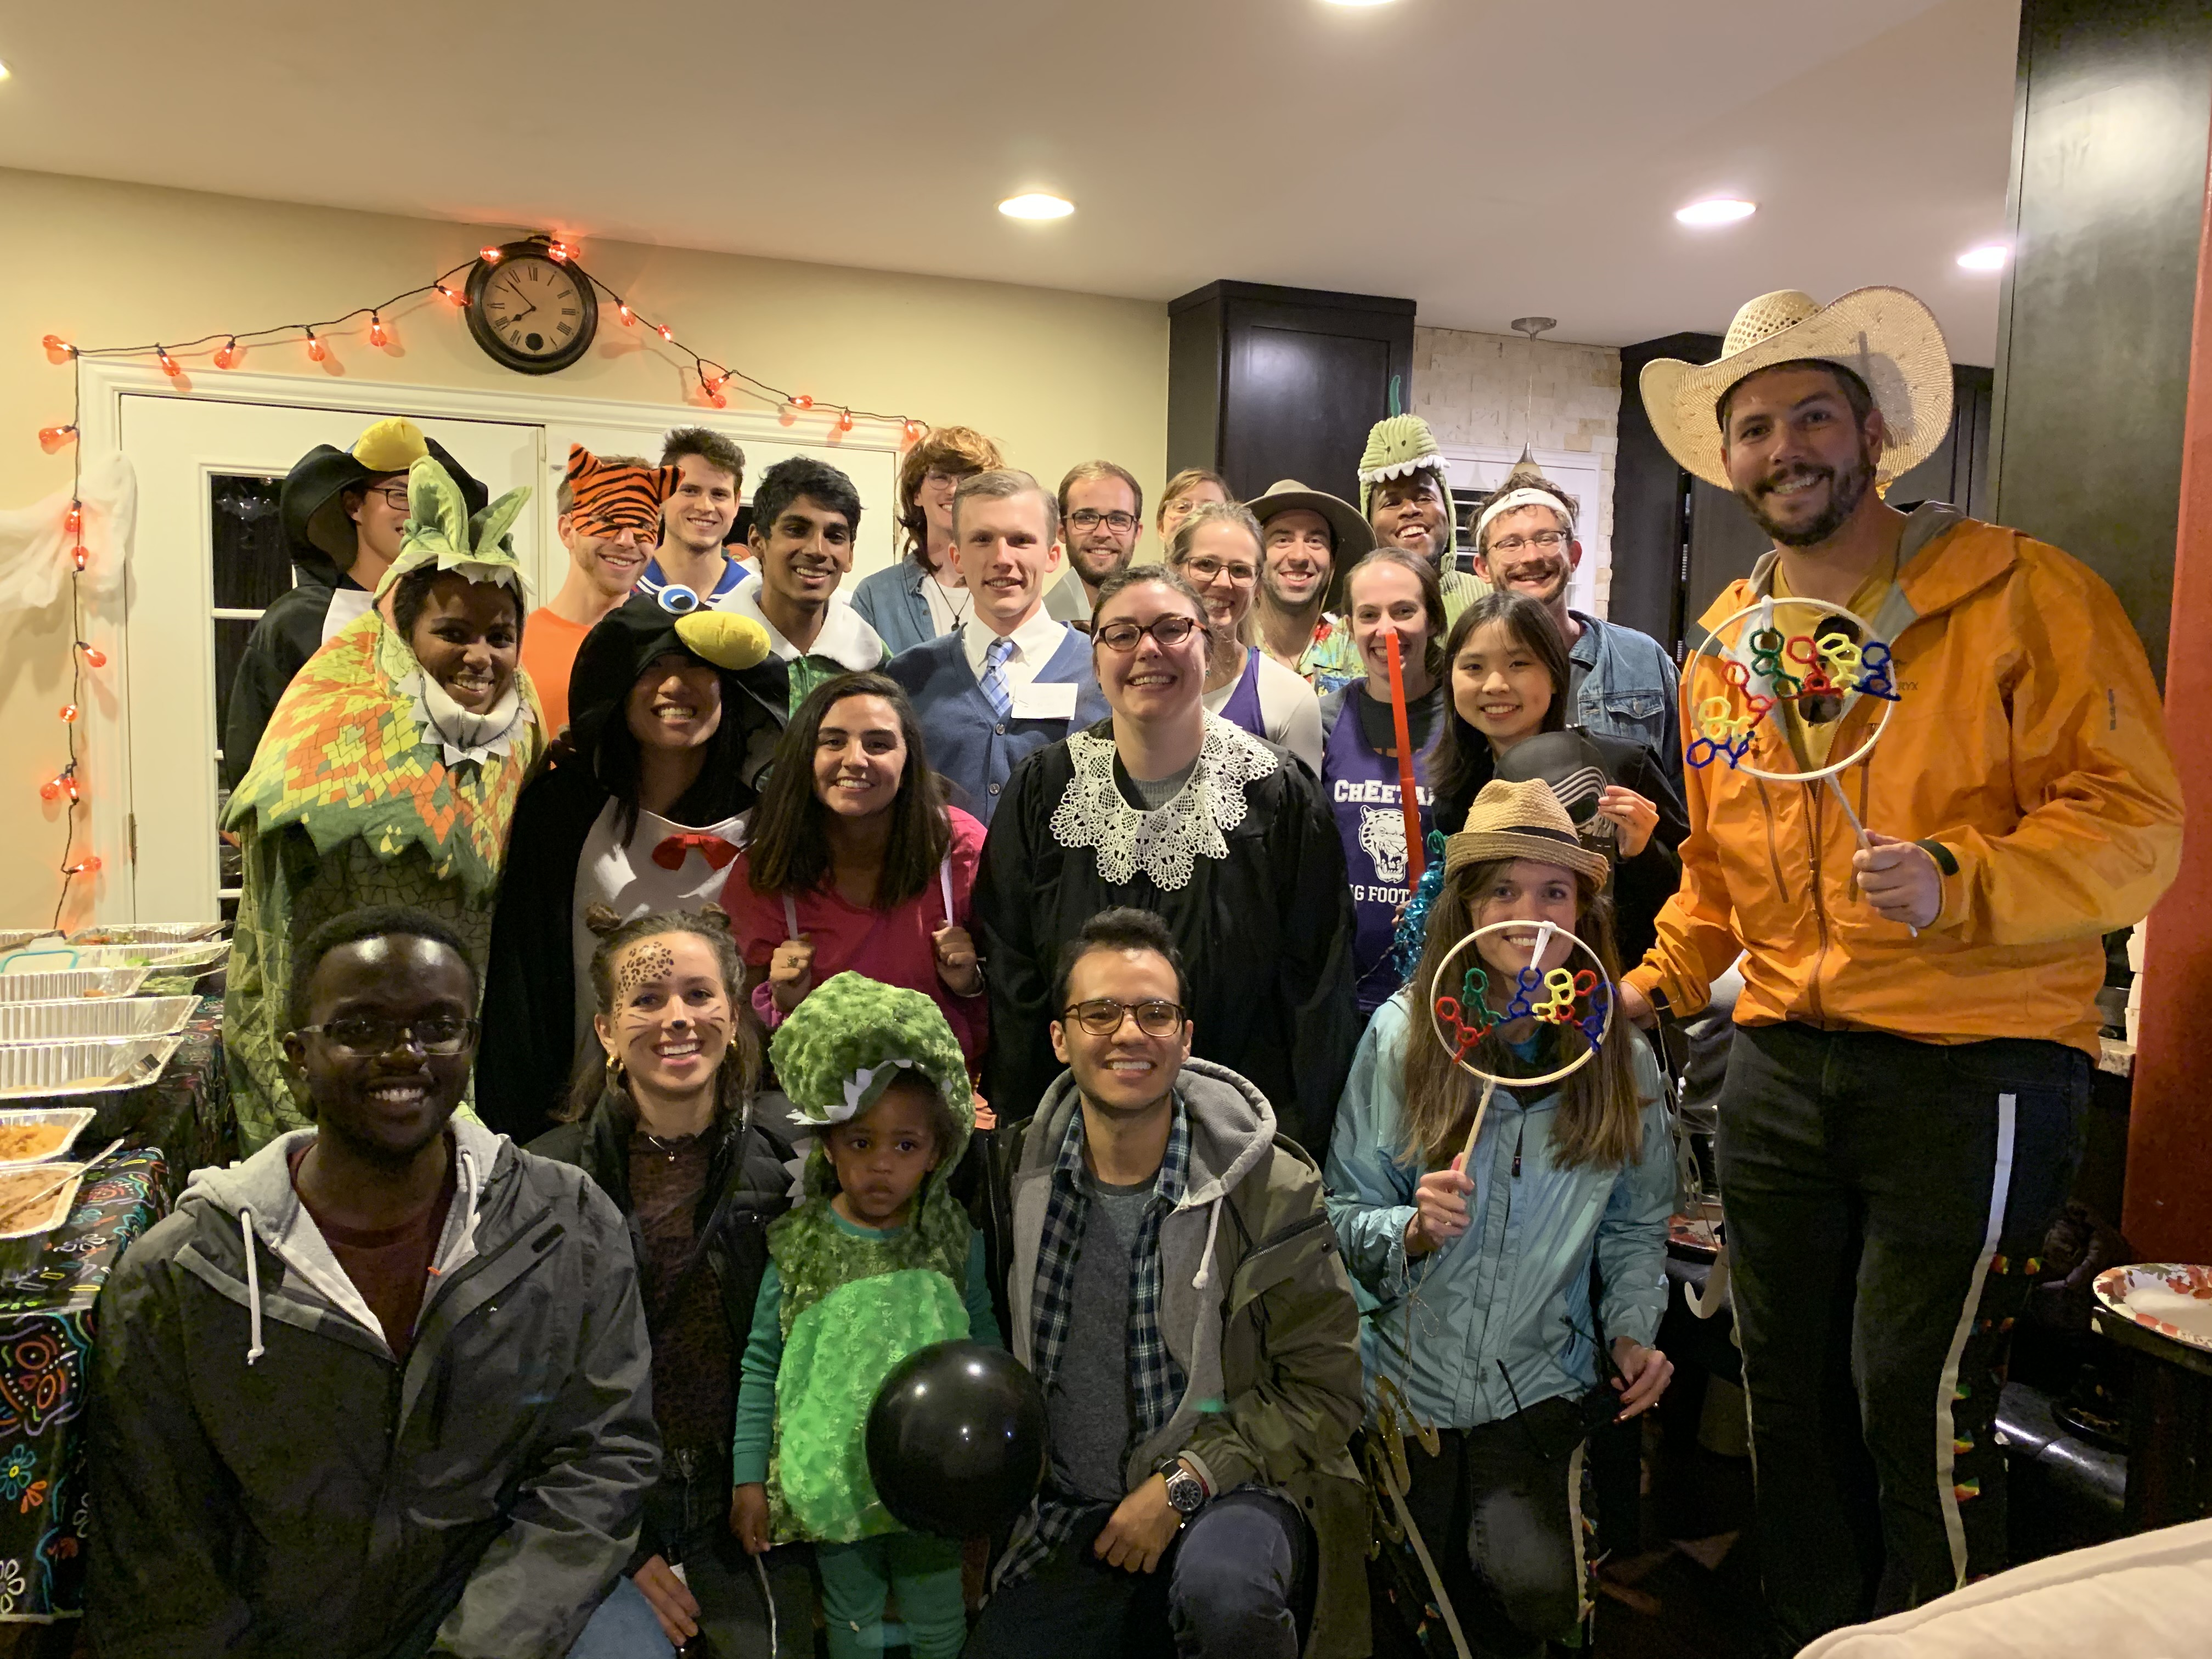 The Contreras group and friends, Halloween 2019